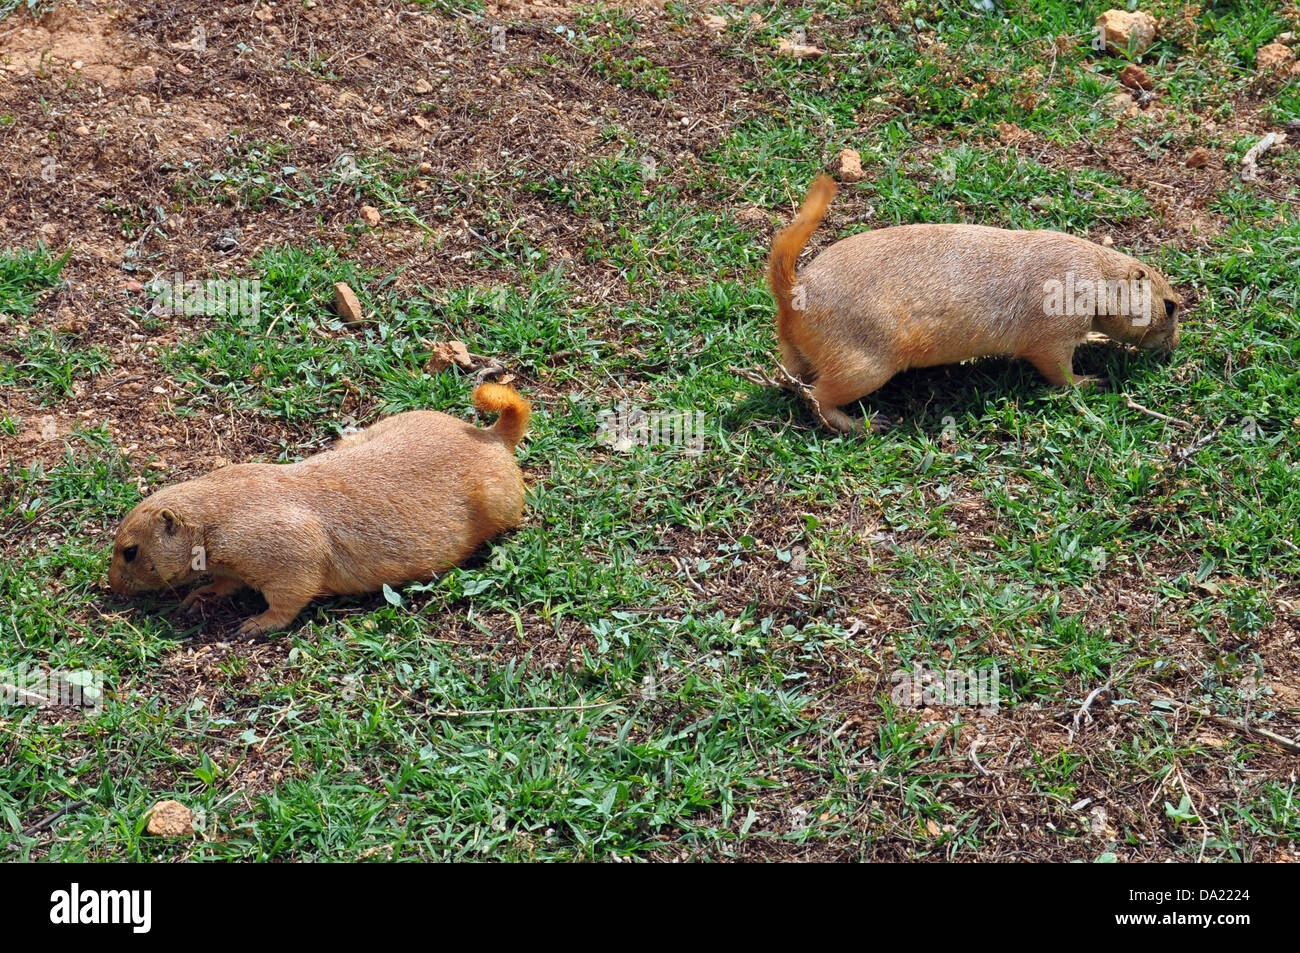 Prairie dog rodents feeding on grass. Animals in natural environment. Stock Photo